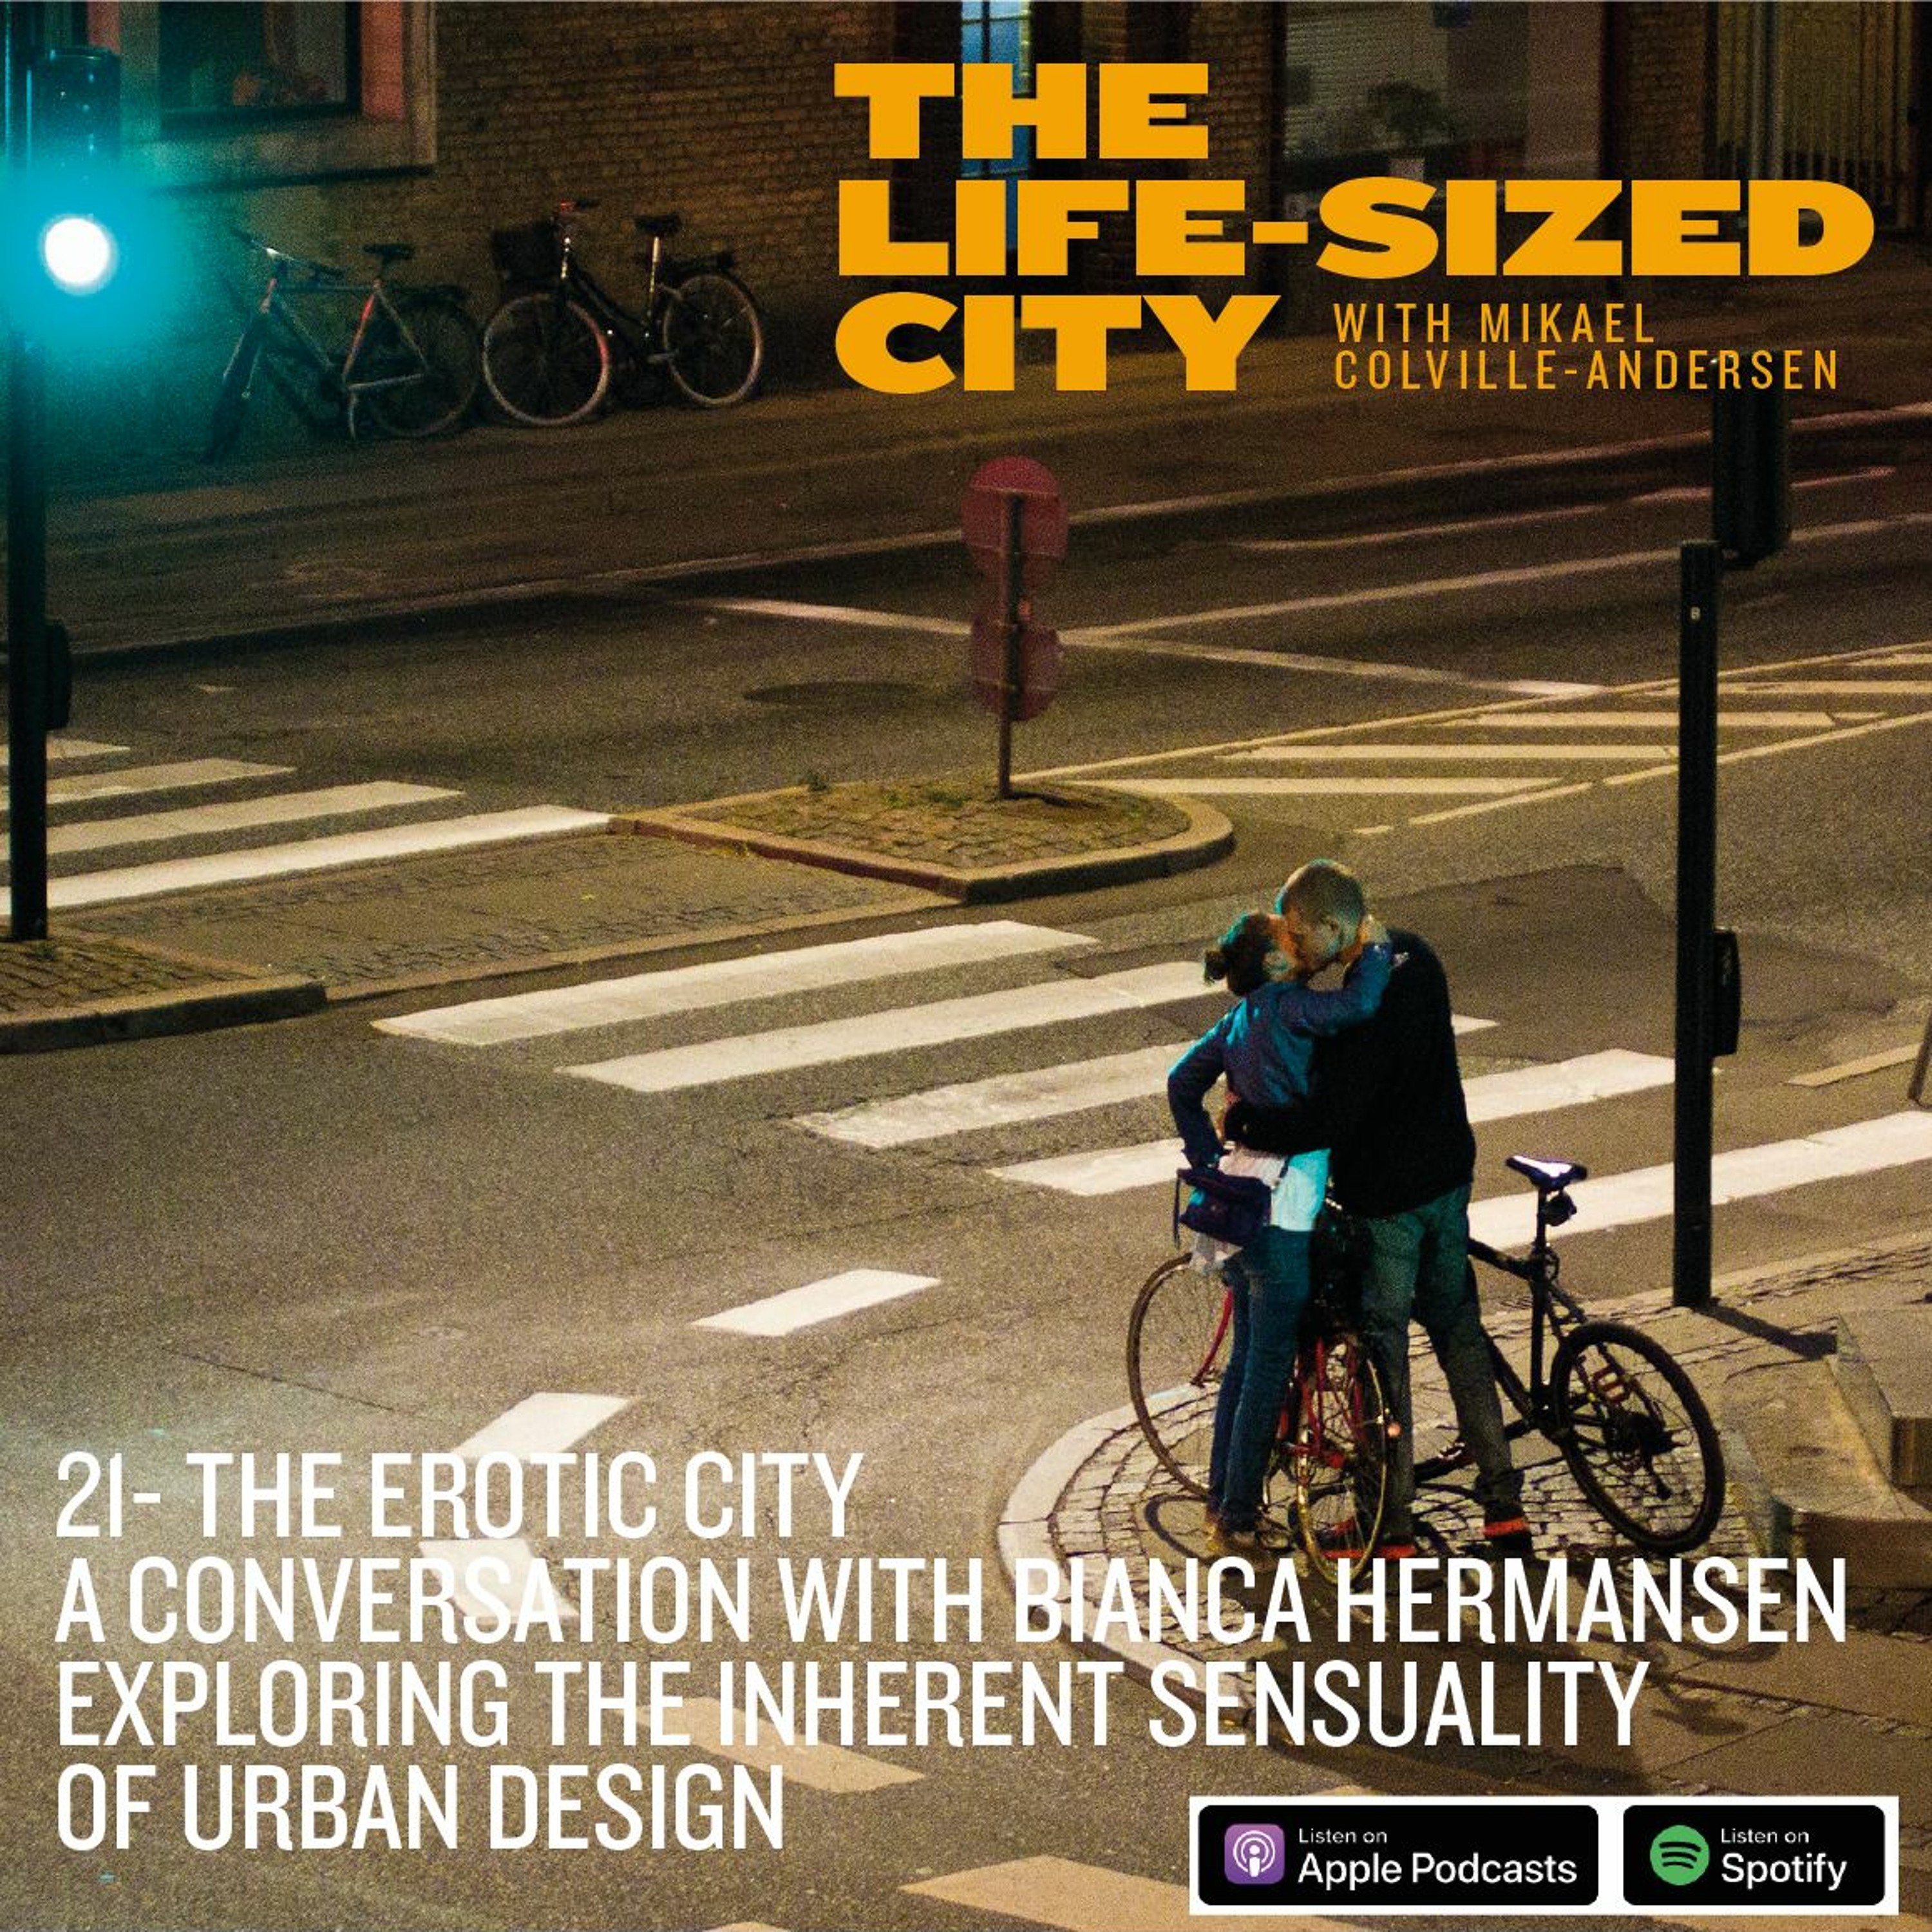 The Erotic City - a conversation with Bianca Hermansen exploring sensuality in urbanism - Ep 21